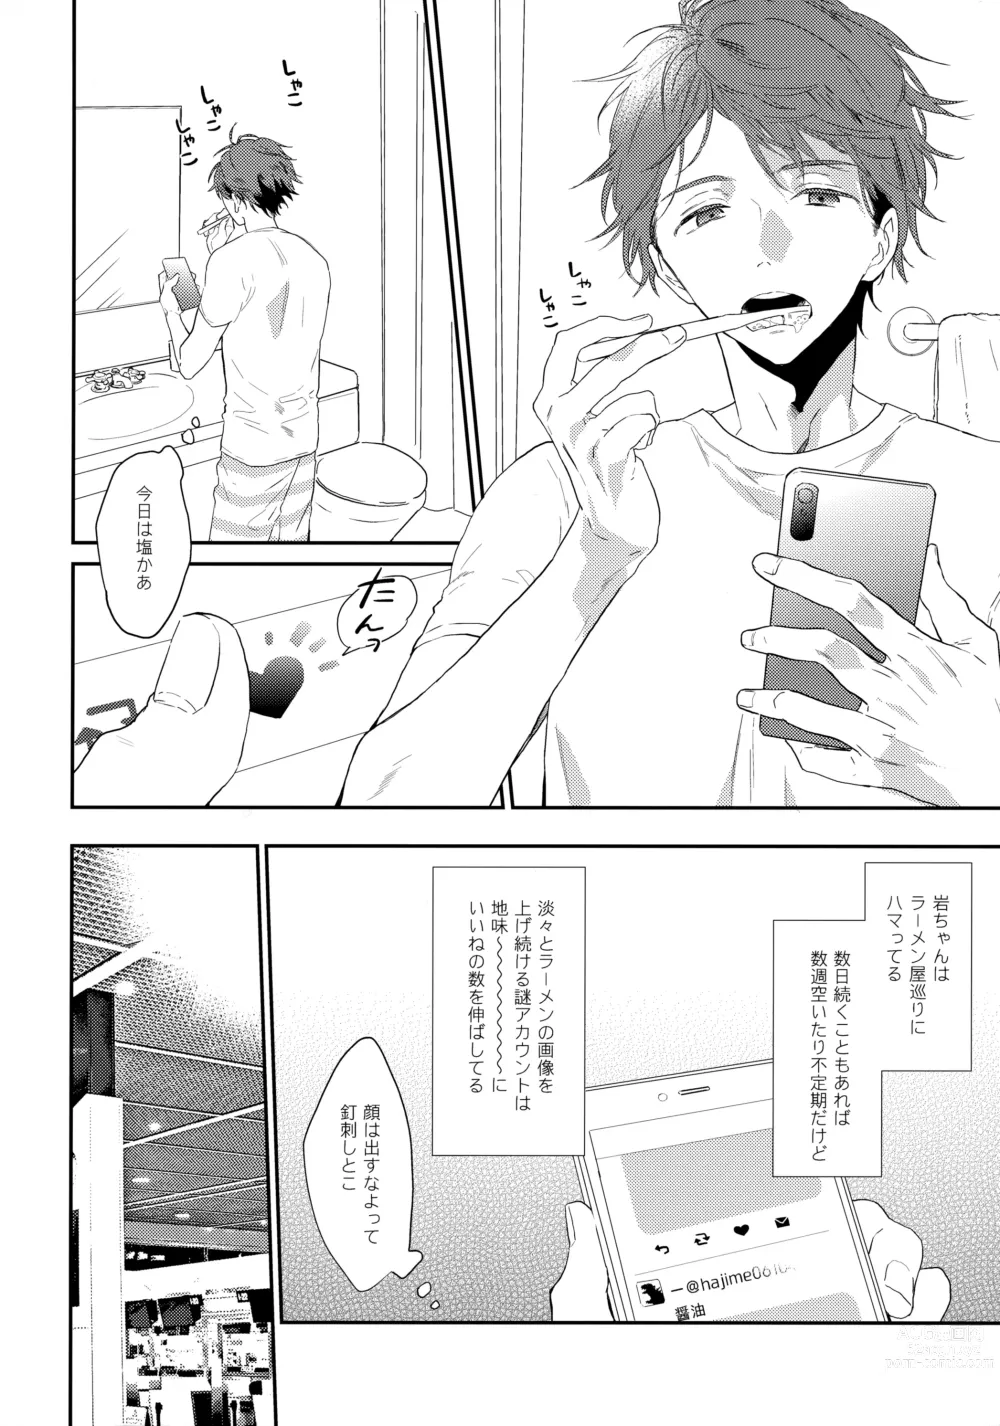 Page 3 of doujinshi SOCIAL NETWORK SERVICE